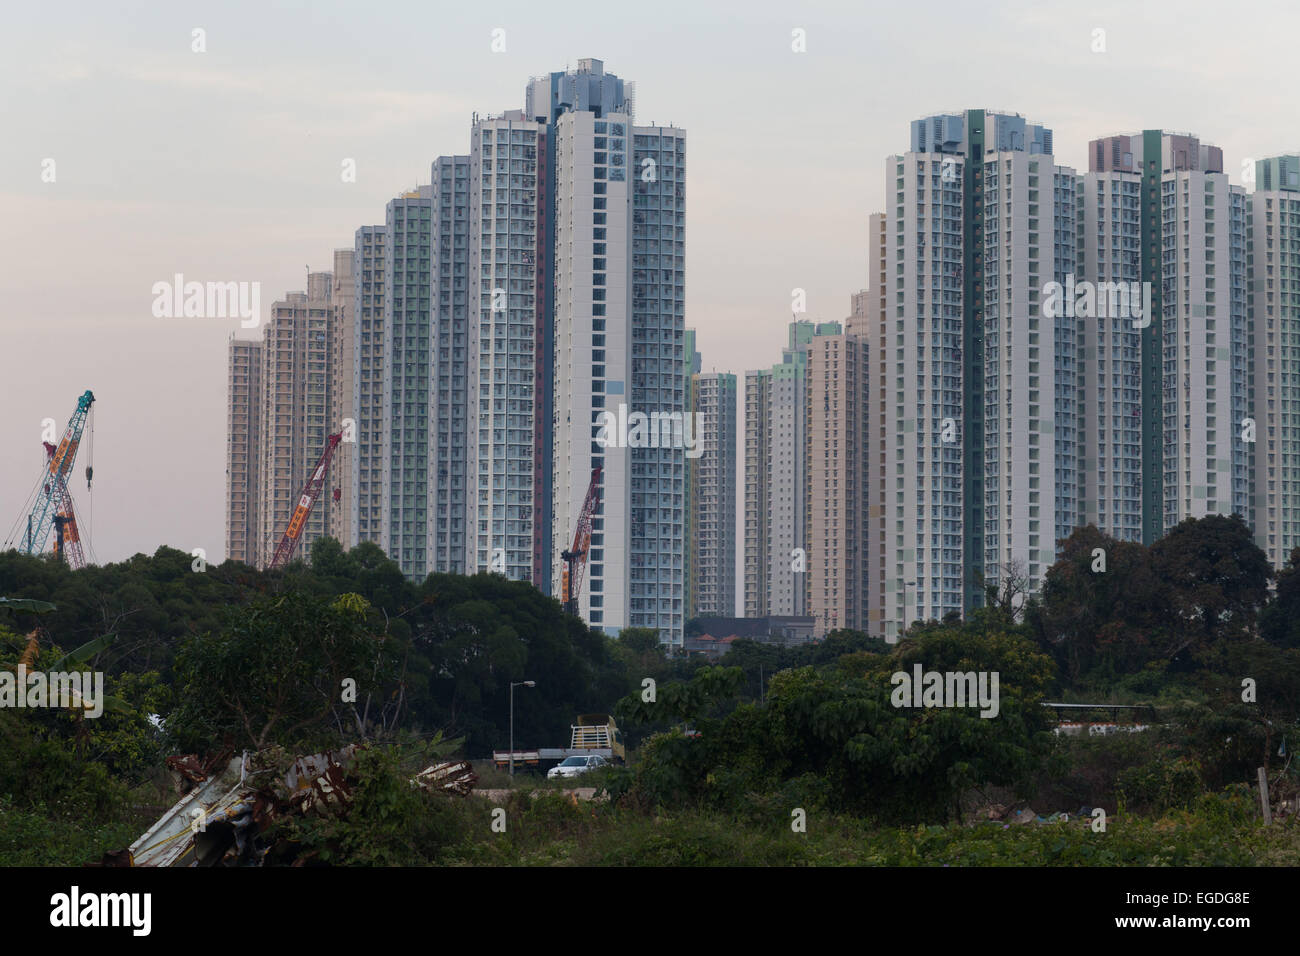 Tung Chung city is part of Hong Kong and is a giant cluster of tall tower blocks. 7 million people live on 1,104km square. Stock Photo